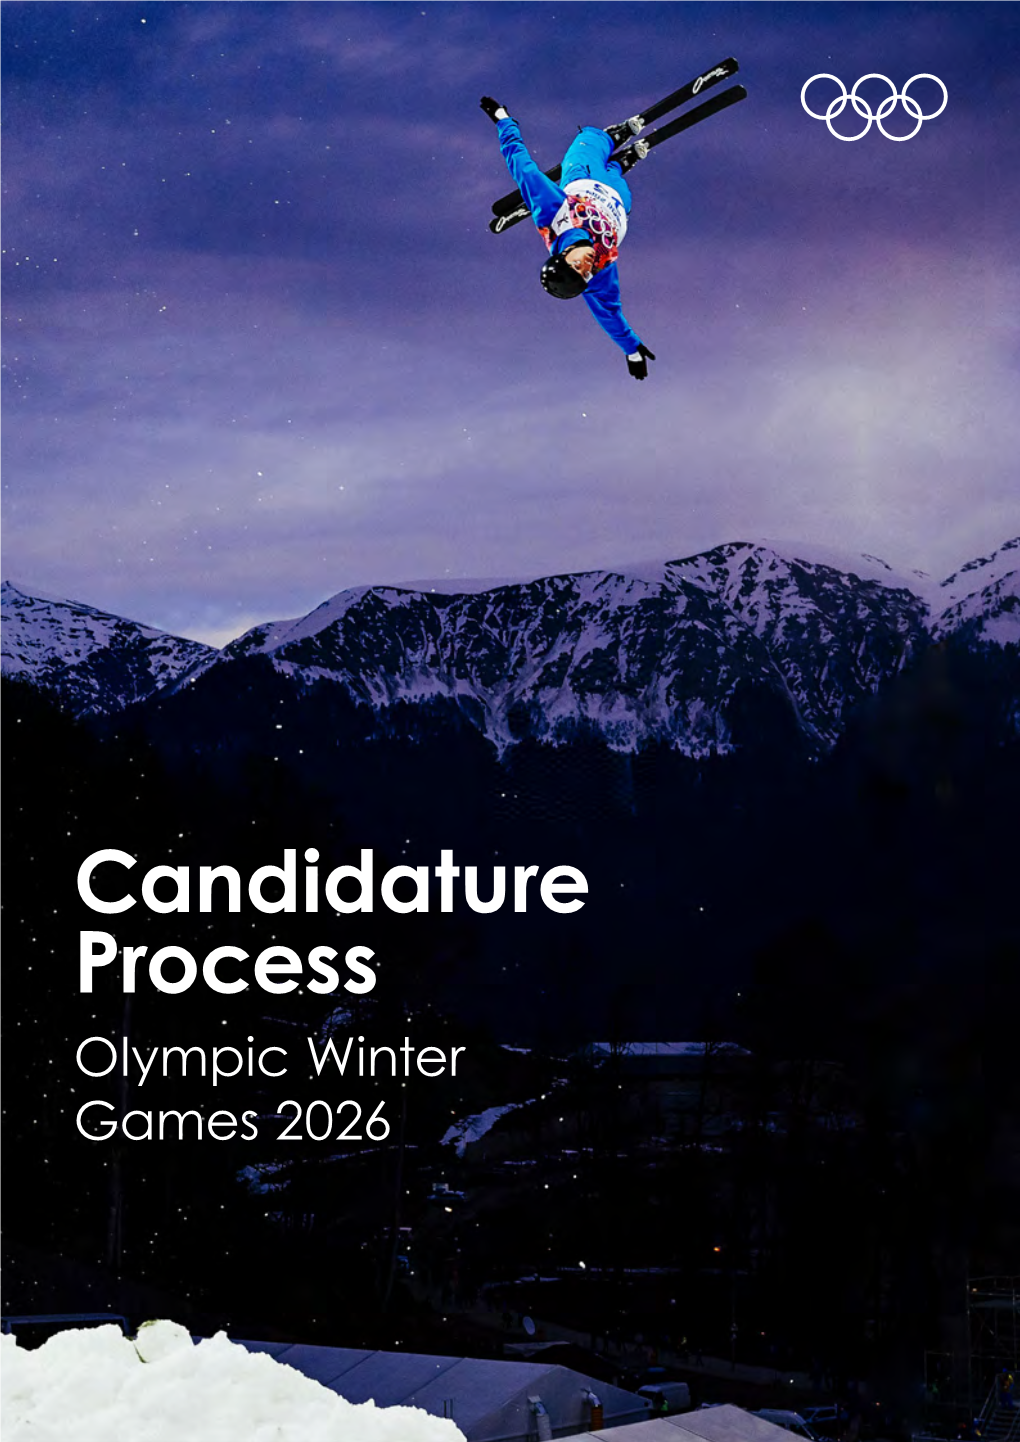 Candidature Process Olympic Winter Games 2026 Candidature Process Olympic Winter Games 2026